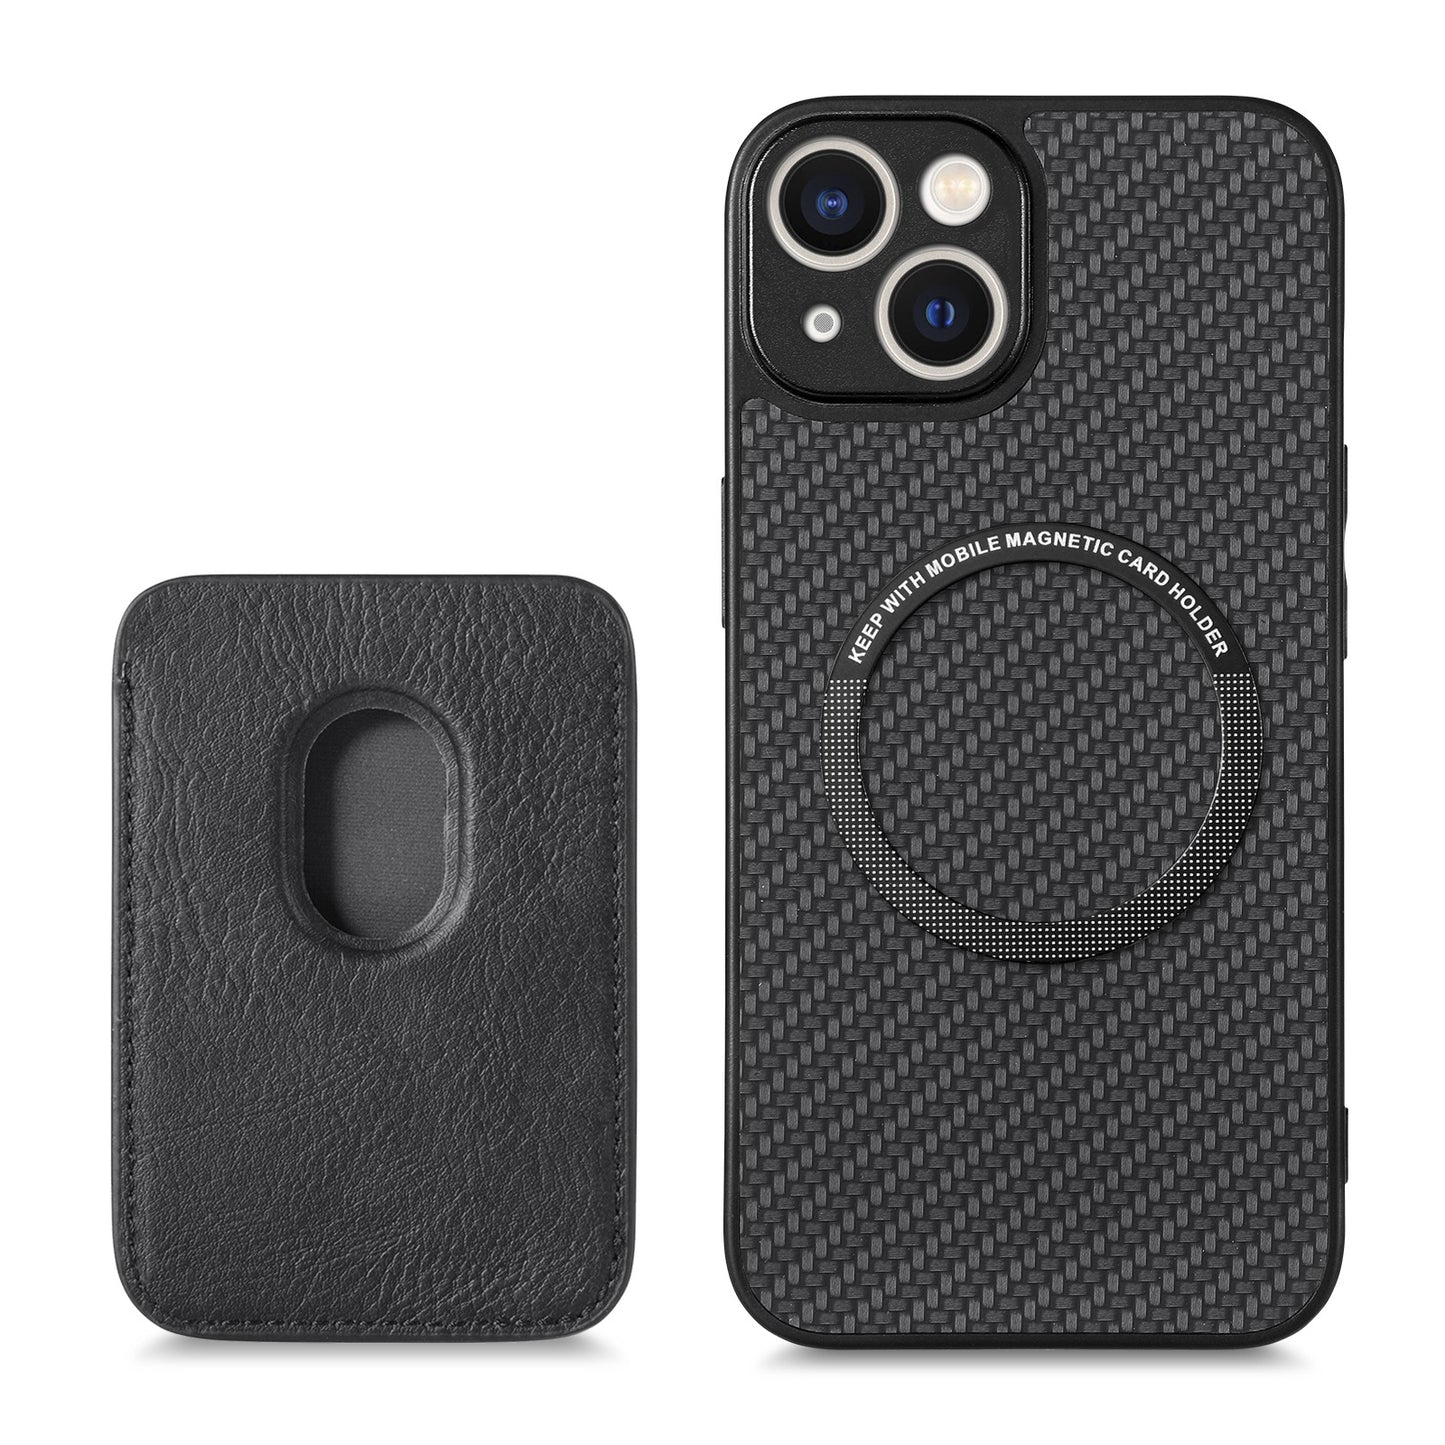 2 in 1 Detachable Card holder Case for iPhone